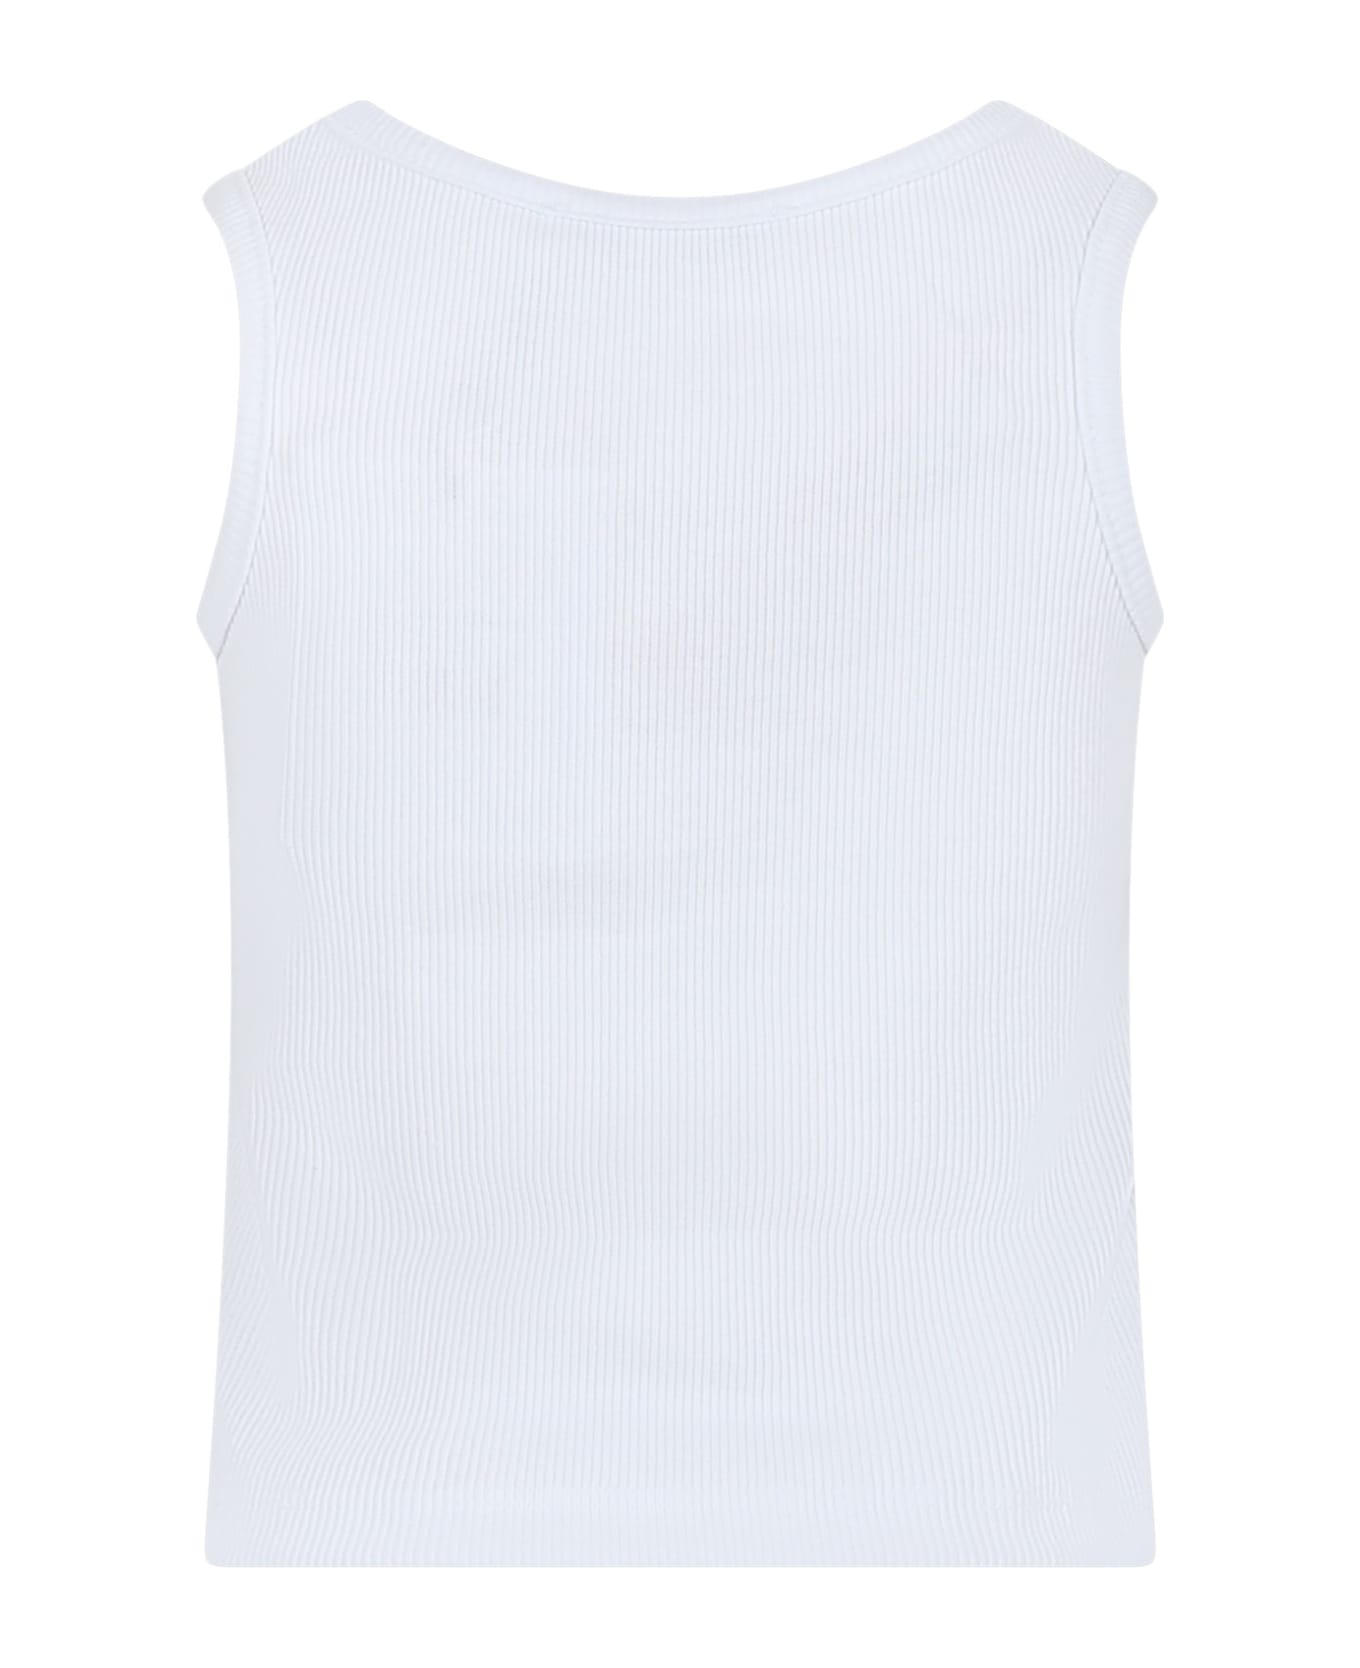 MSGM White Tank Top For Girl With Logo - White